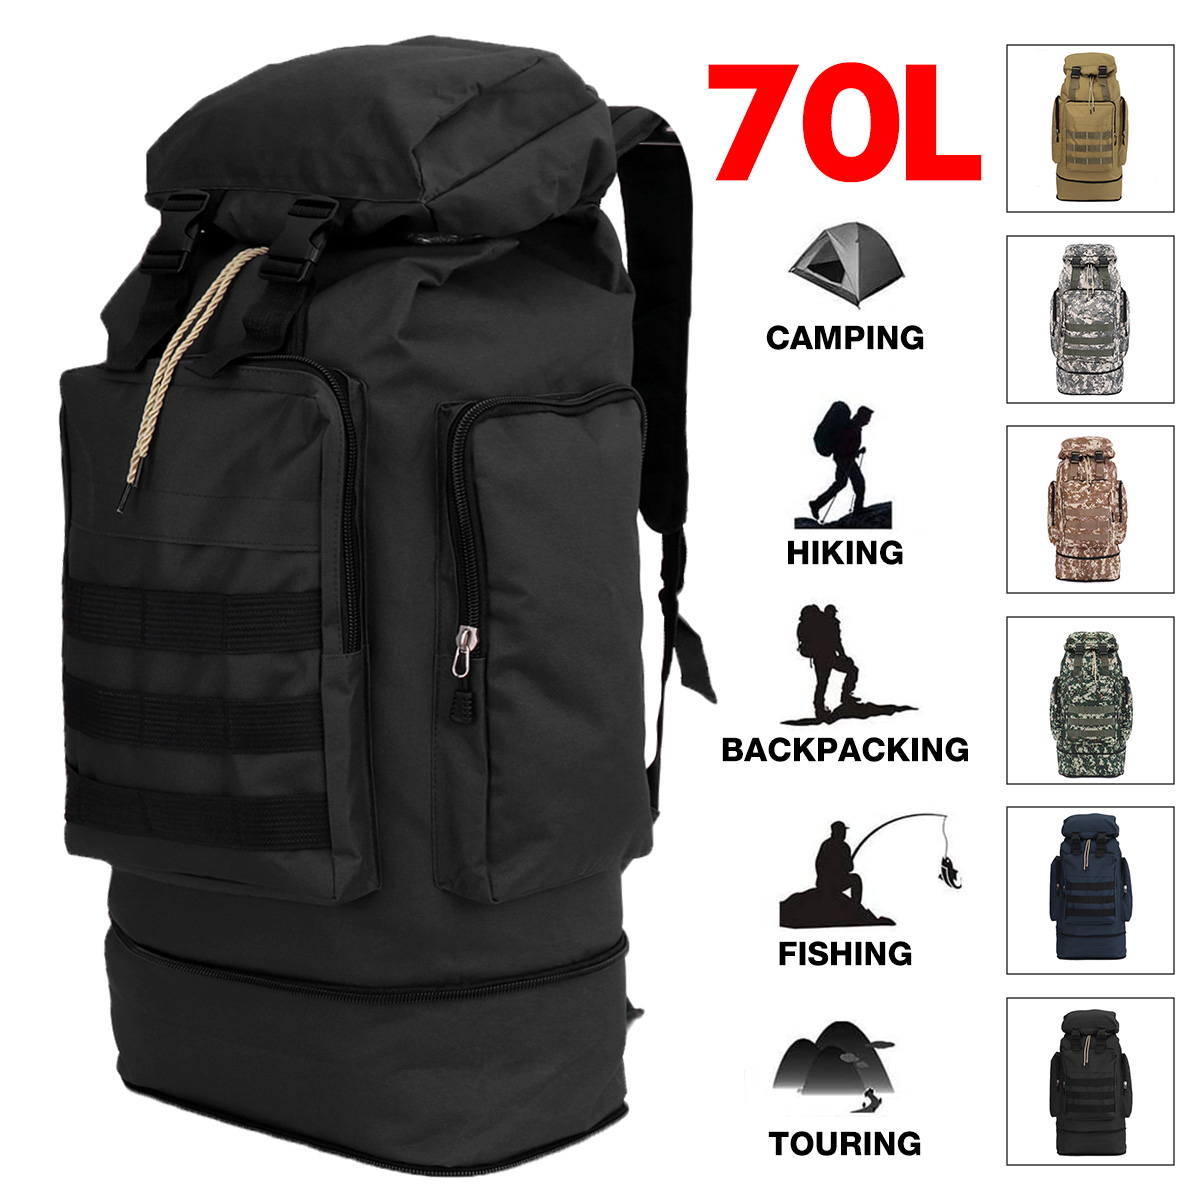 60L10L-Expanded-Large-Capacity-with-Mobile-Phone-Storage-Side-Bag-Outdoor-Hiking-Backpack-1869568-1